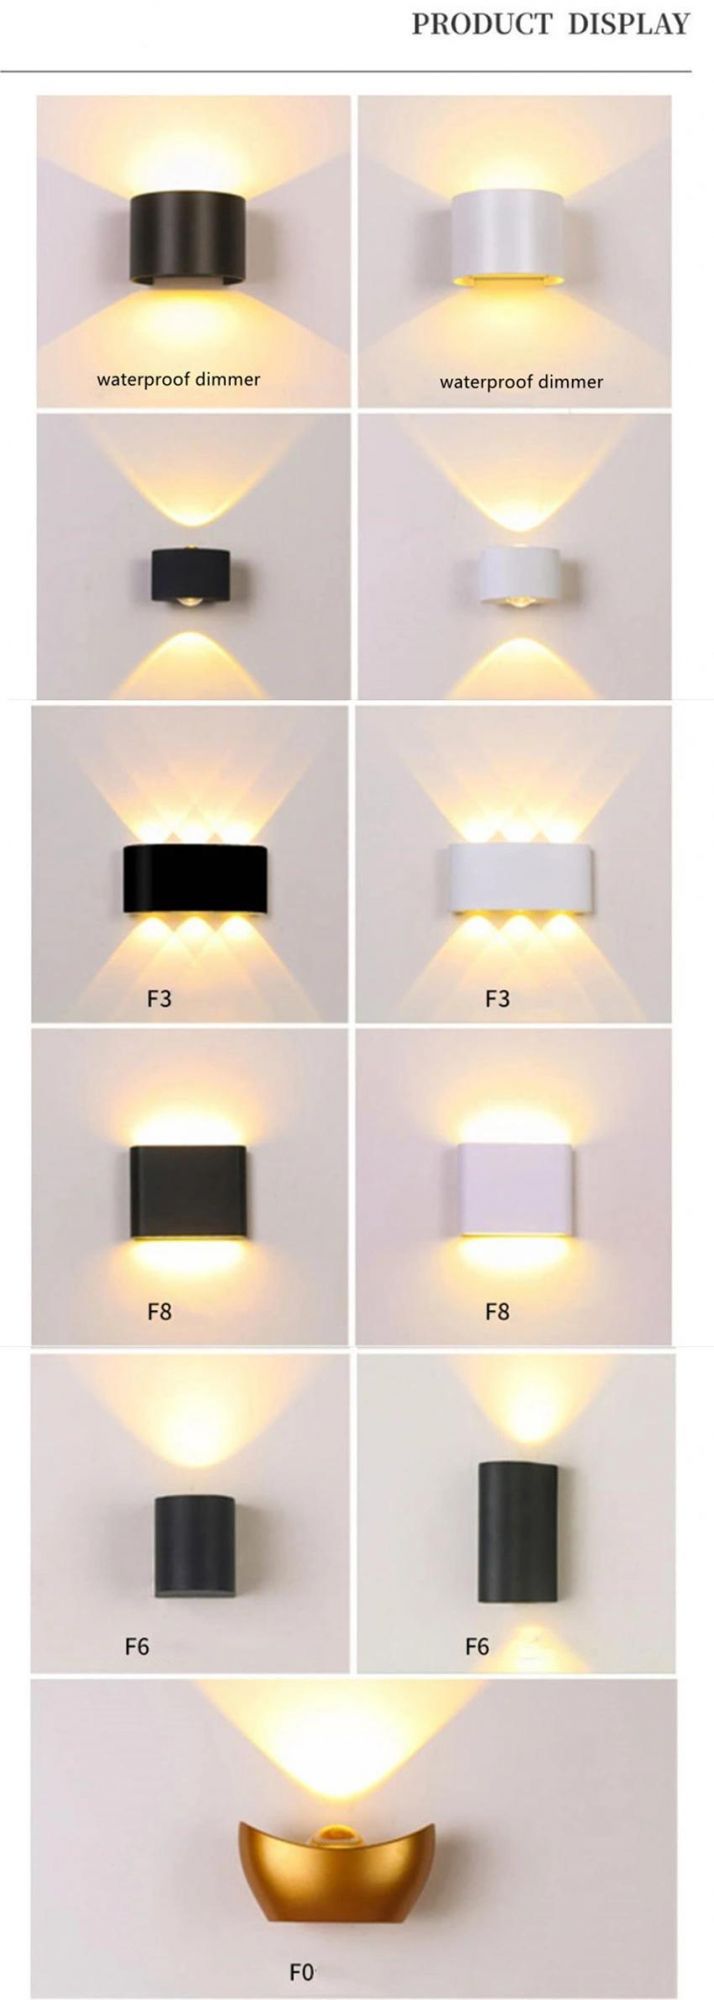 China Supplier Double Light LED Indoor Home Decoration Wall Light